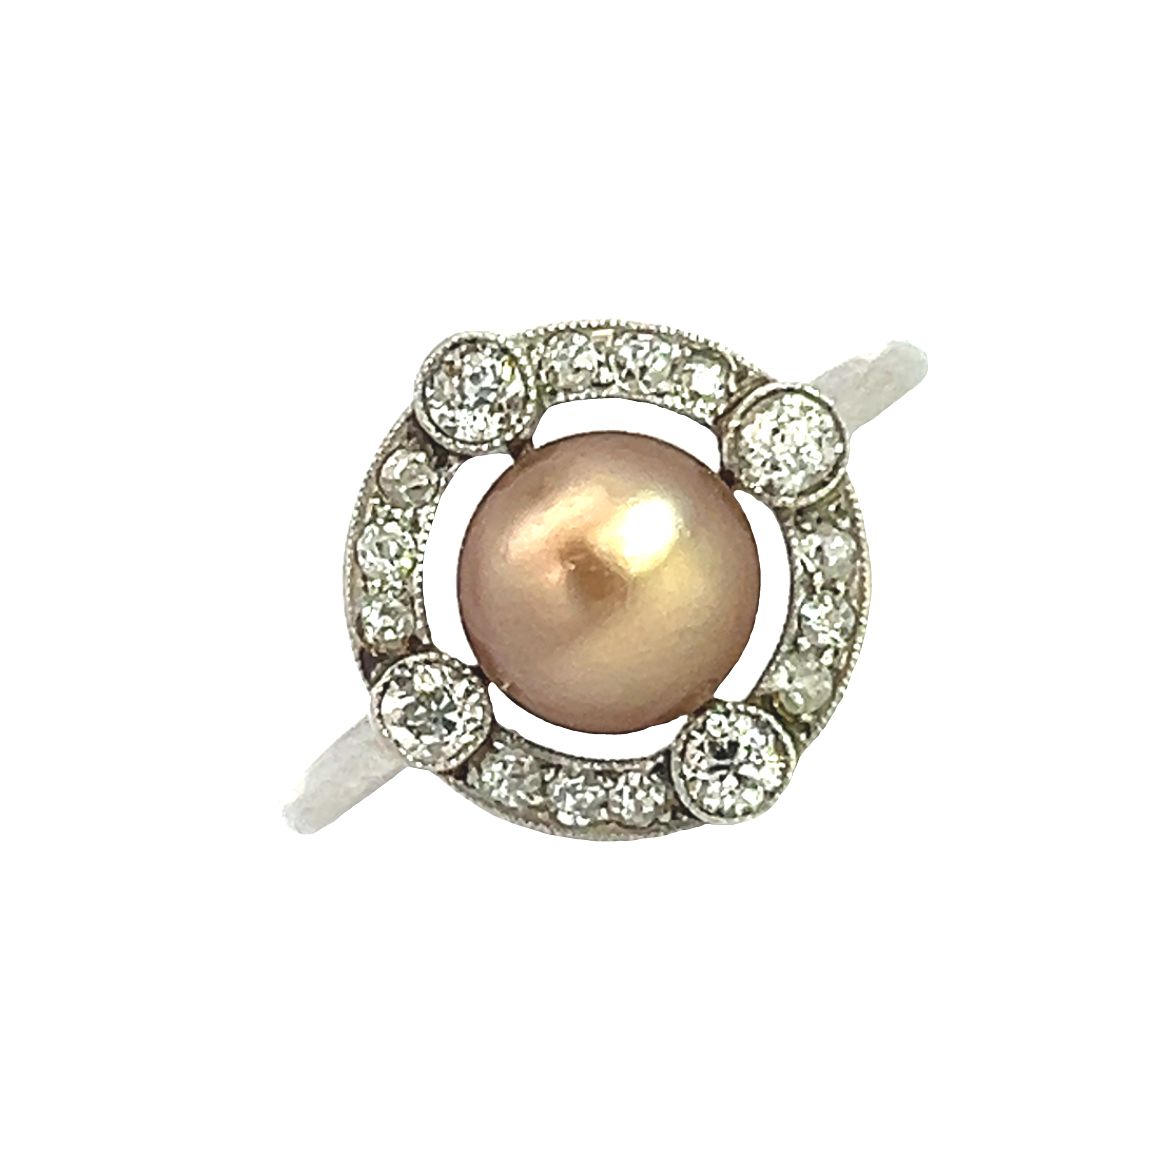 An Antique Pearl and Diamond Ring